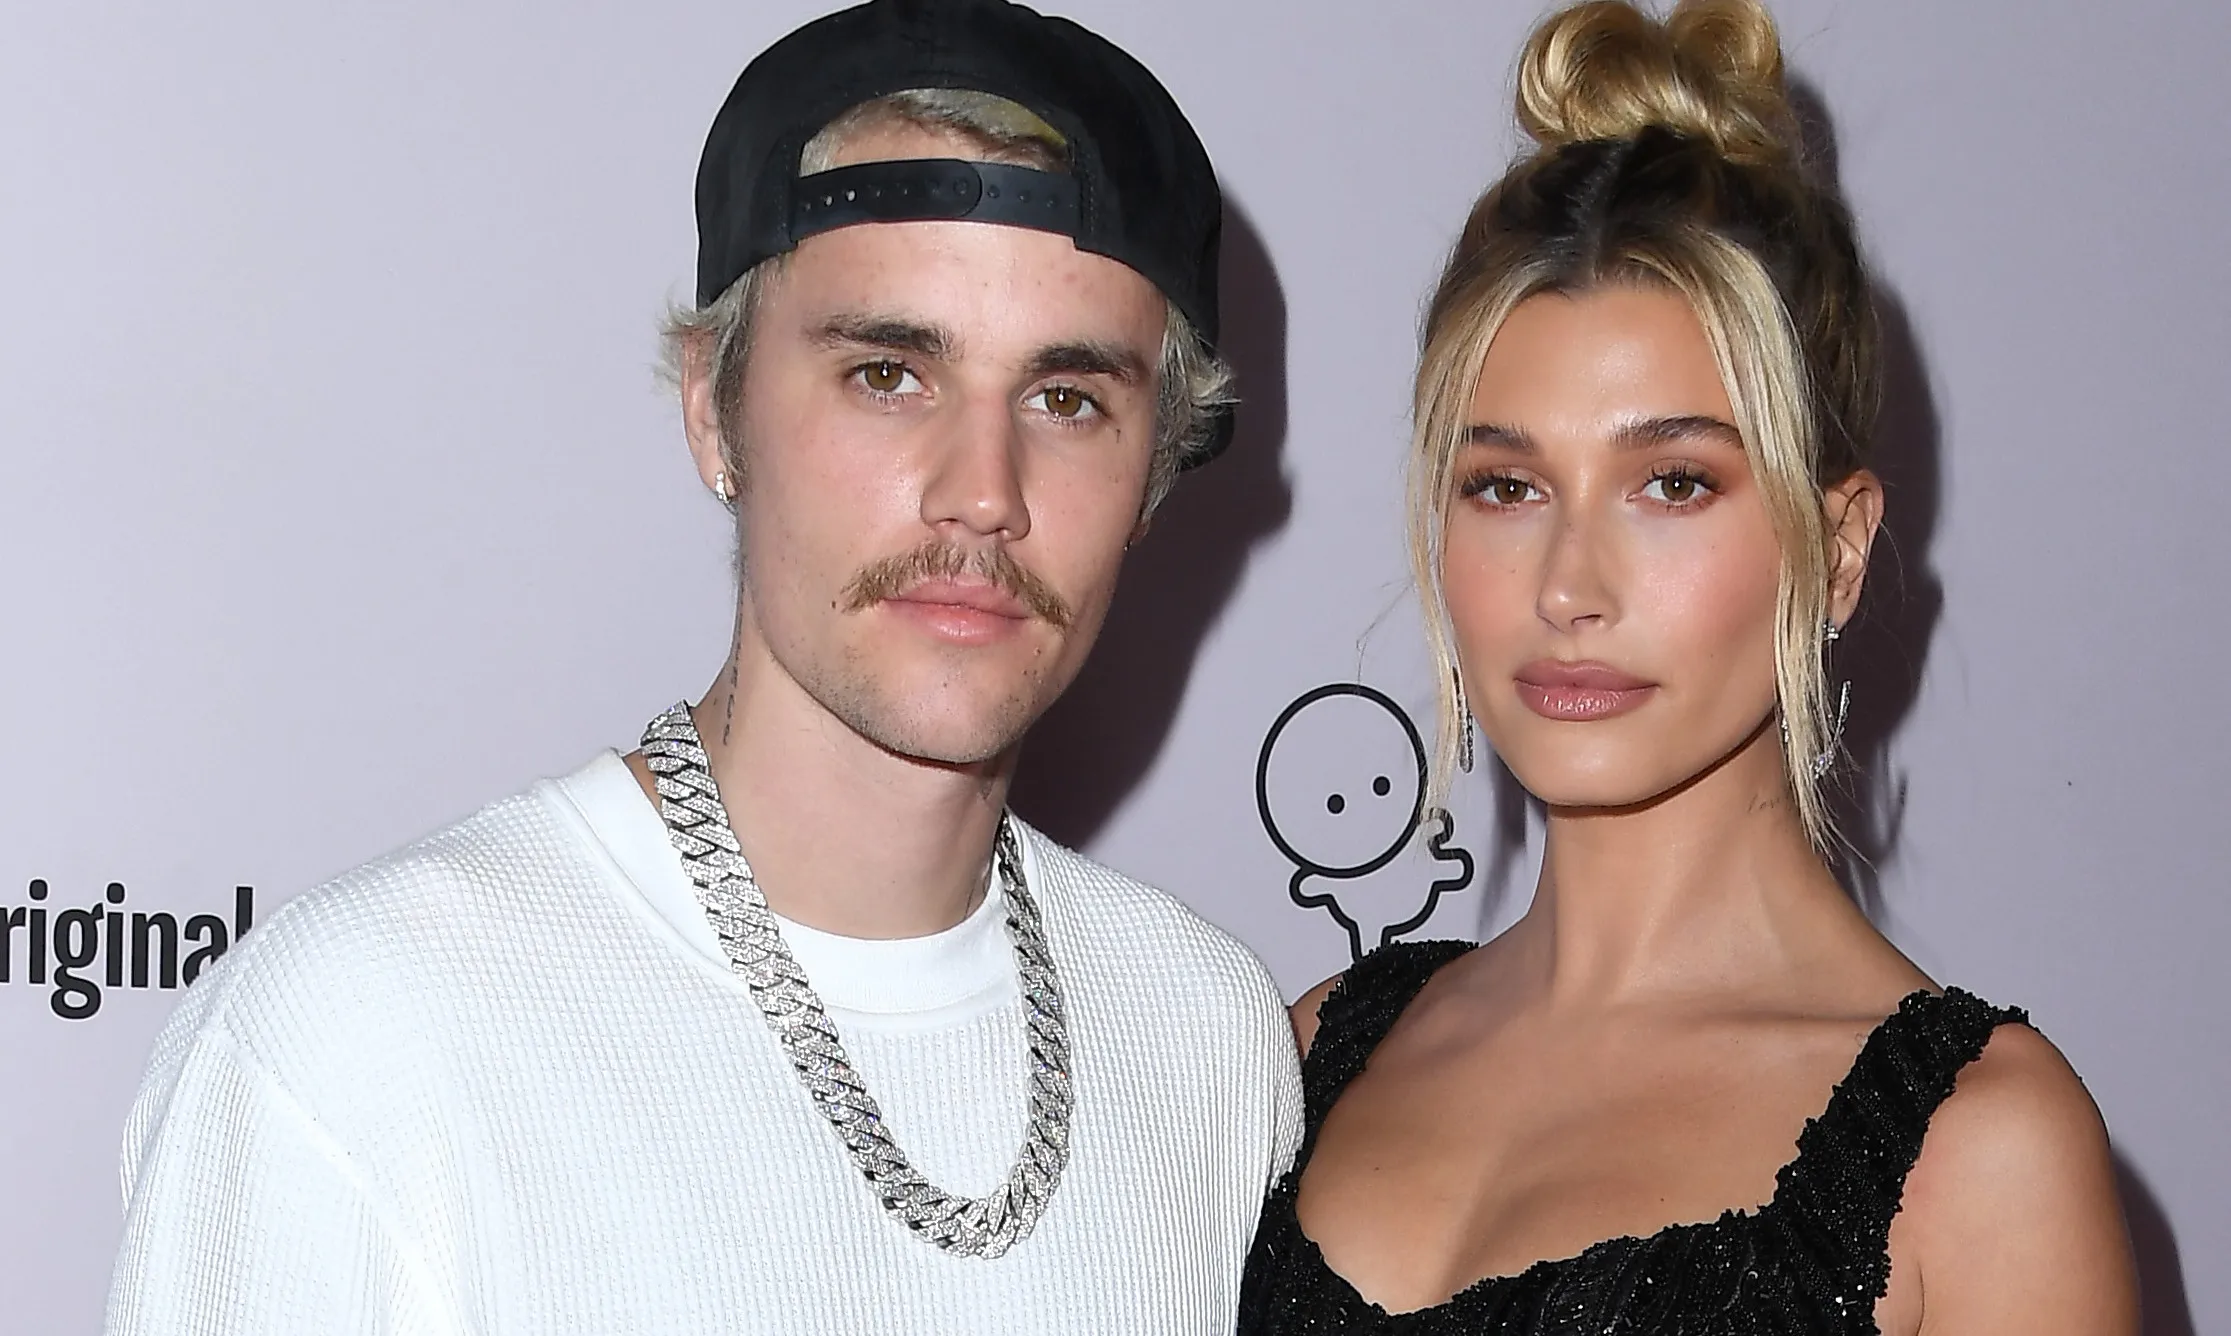 Justin Bieber Panicked After Wife Experienced Stroke-like Symptoms